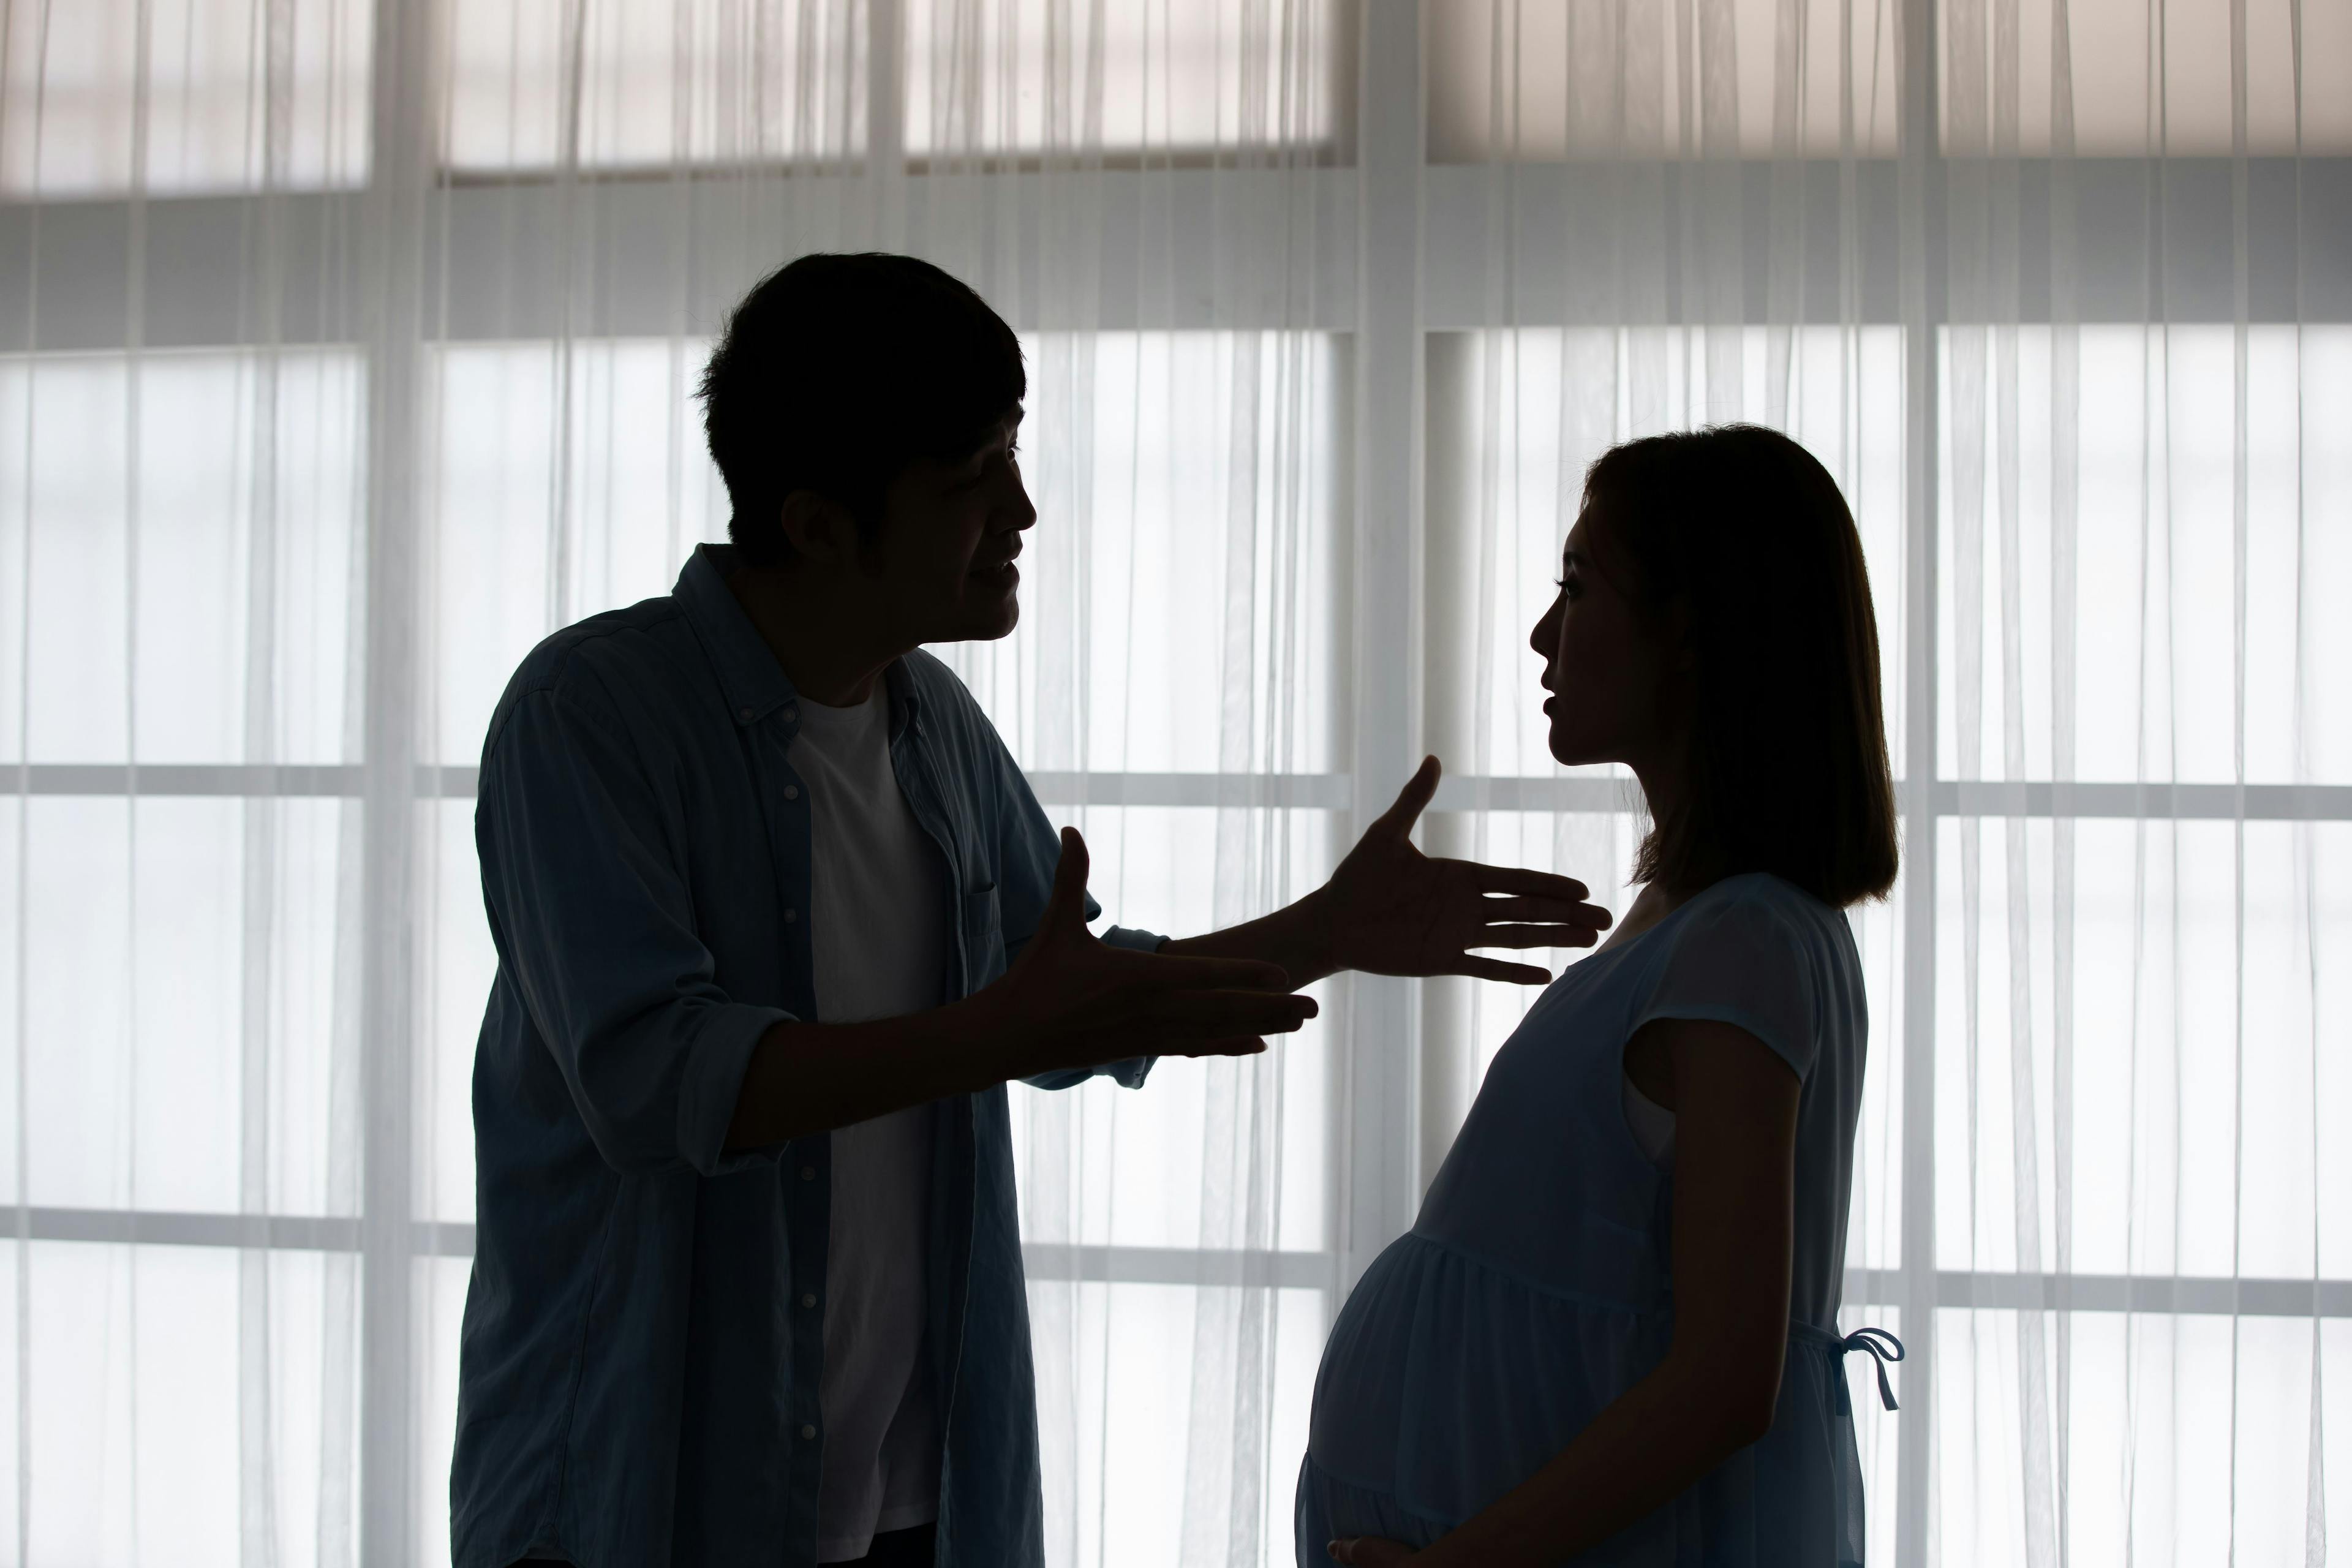 Pregnancy-related homicides a public health priority to reduce maternal mortality rates